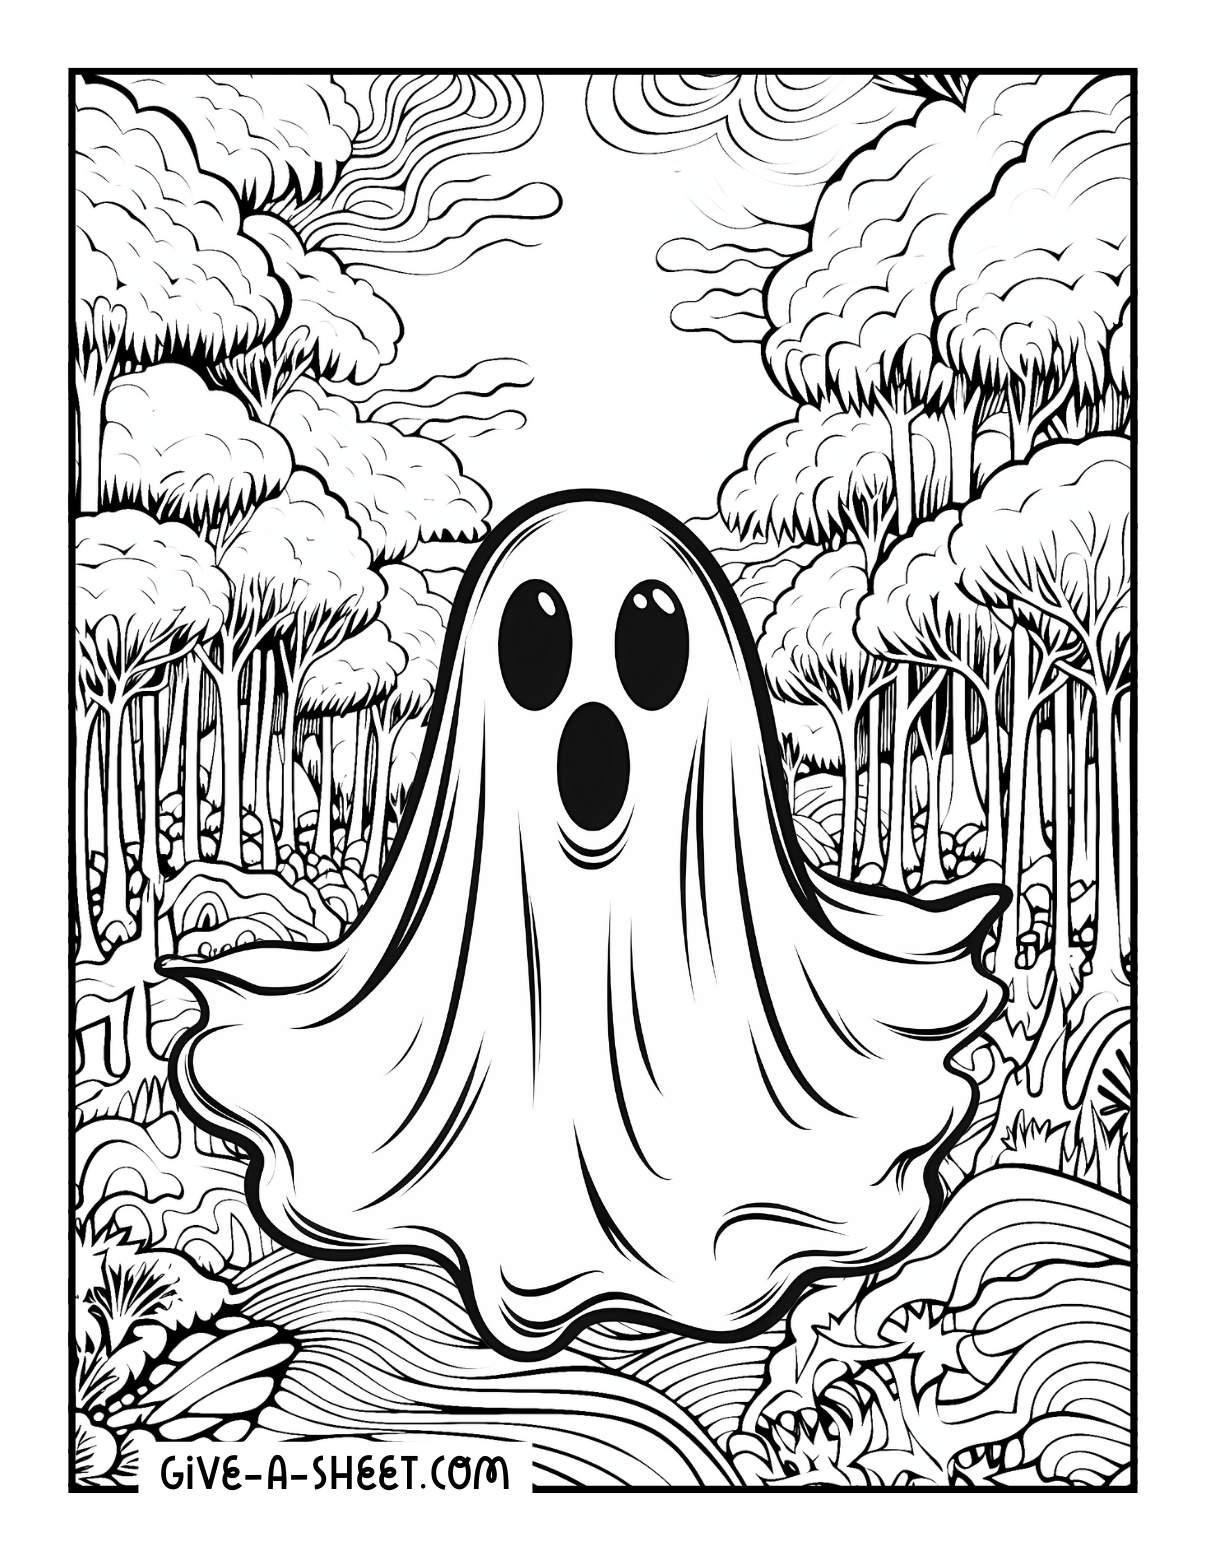 Trippy ghost graveyard coloring page.